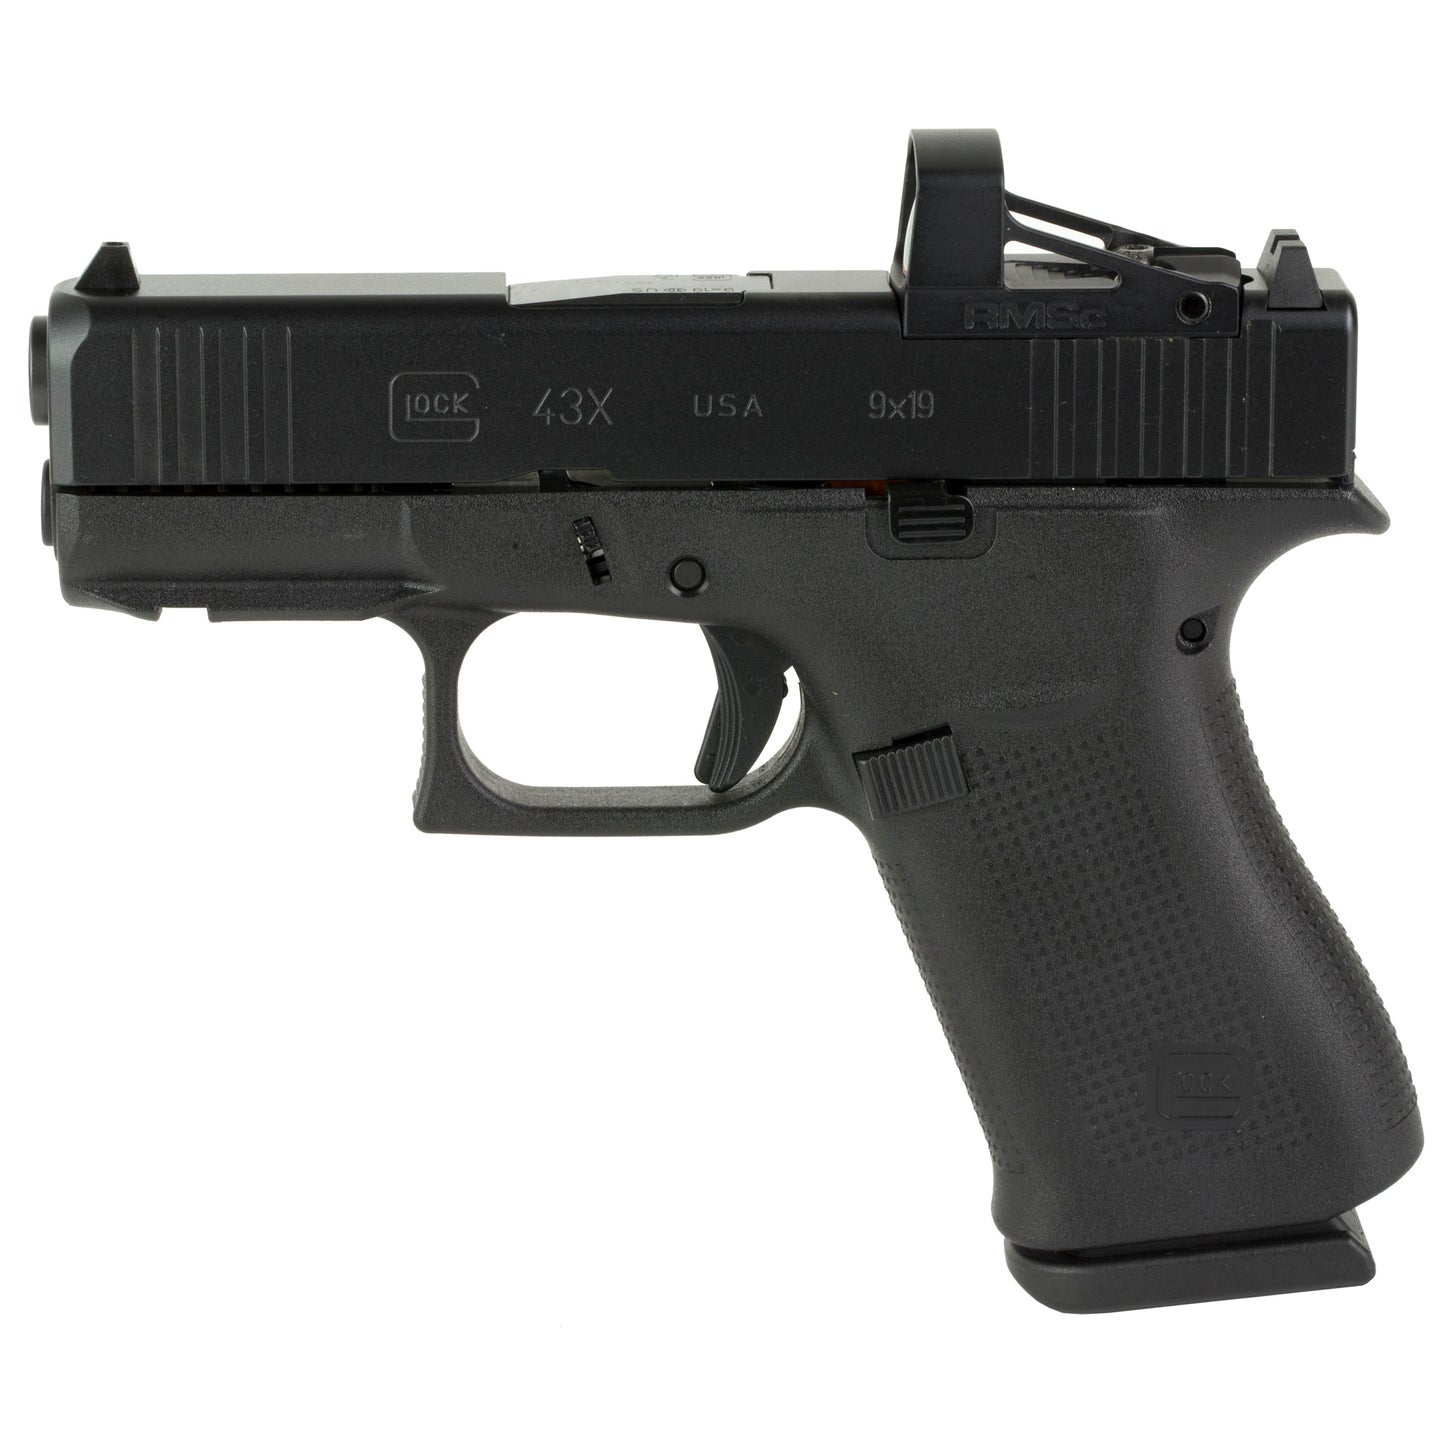 Glock, 43X MOS, TALO Exclusive, Striker Fired, Semi-automatic, Polymer Frame Pistol, Sub-Compact, 9MM, 3.41" Barrel, nPVD Finish, Black, Fixed Sights, Includes RMSc Glass Edition 4MOA Dot Shield Optic, 10 Rounds, 2 Magazines, Right Hand